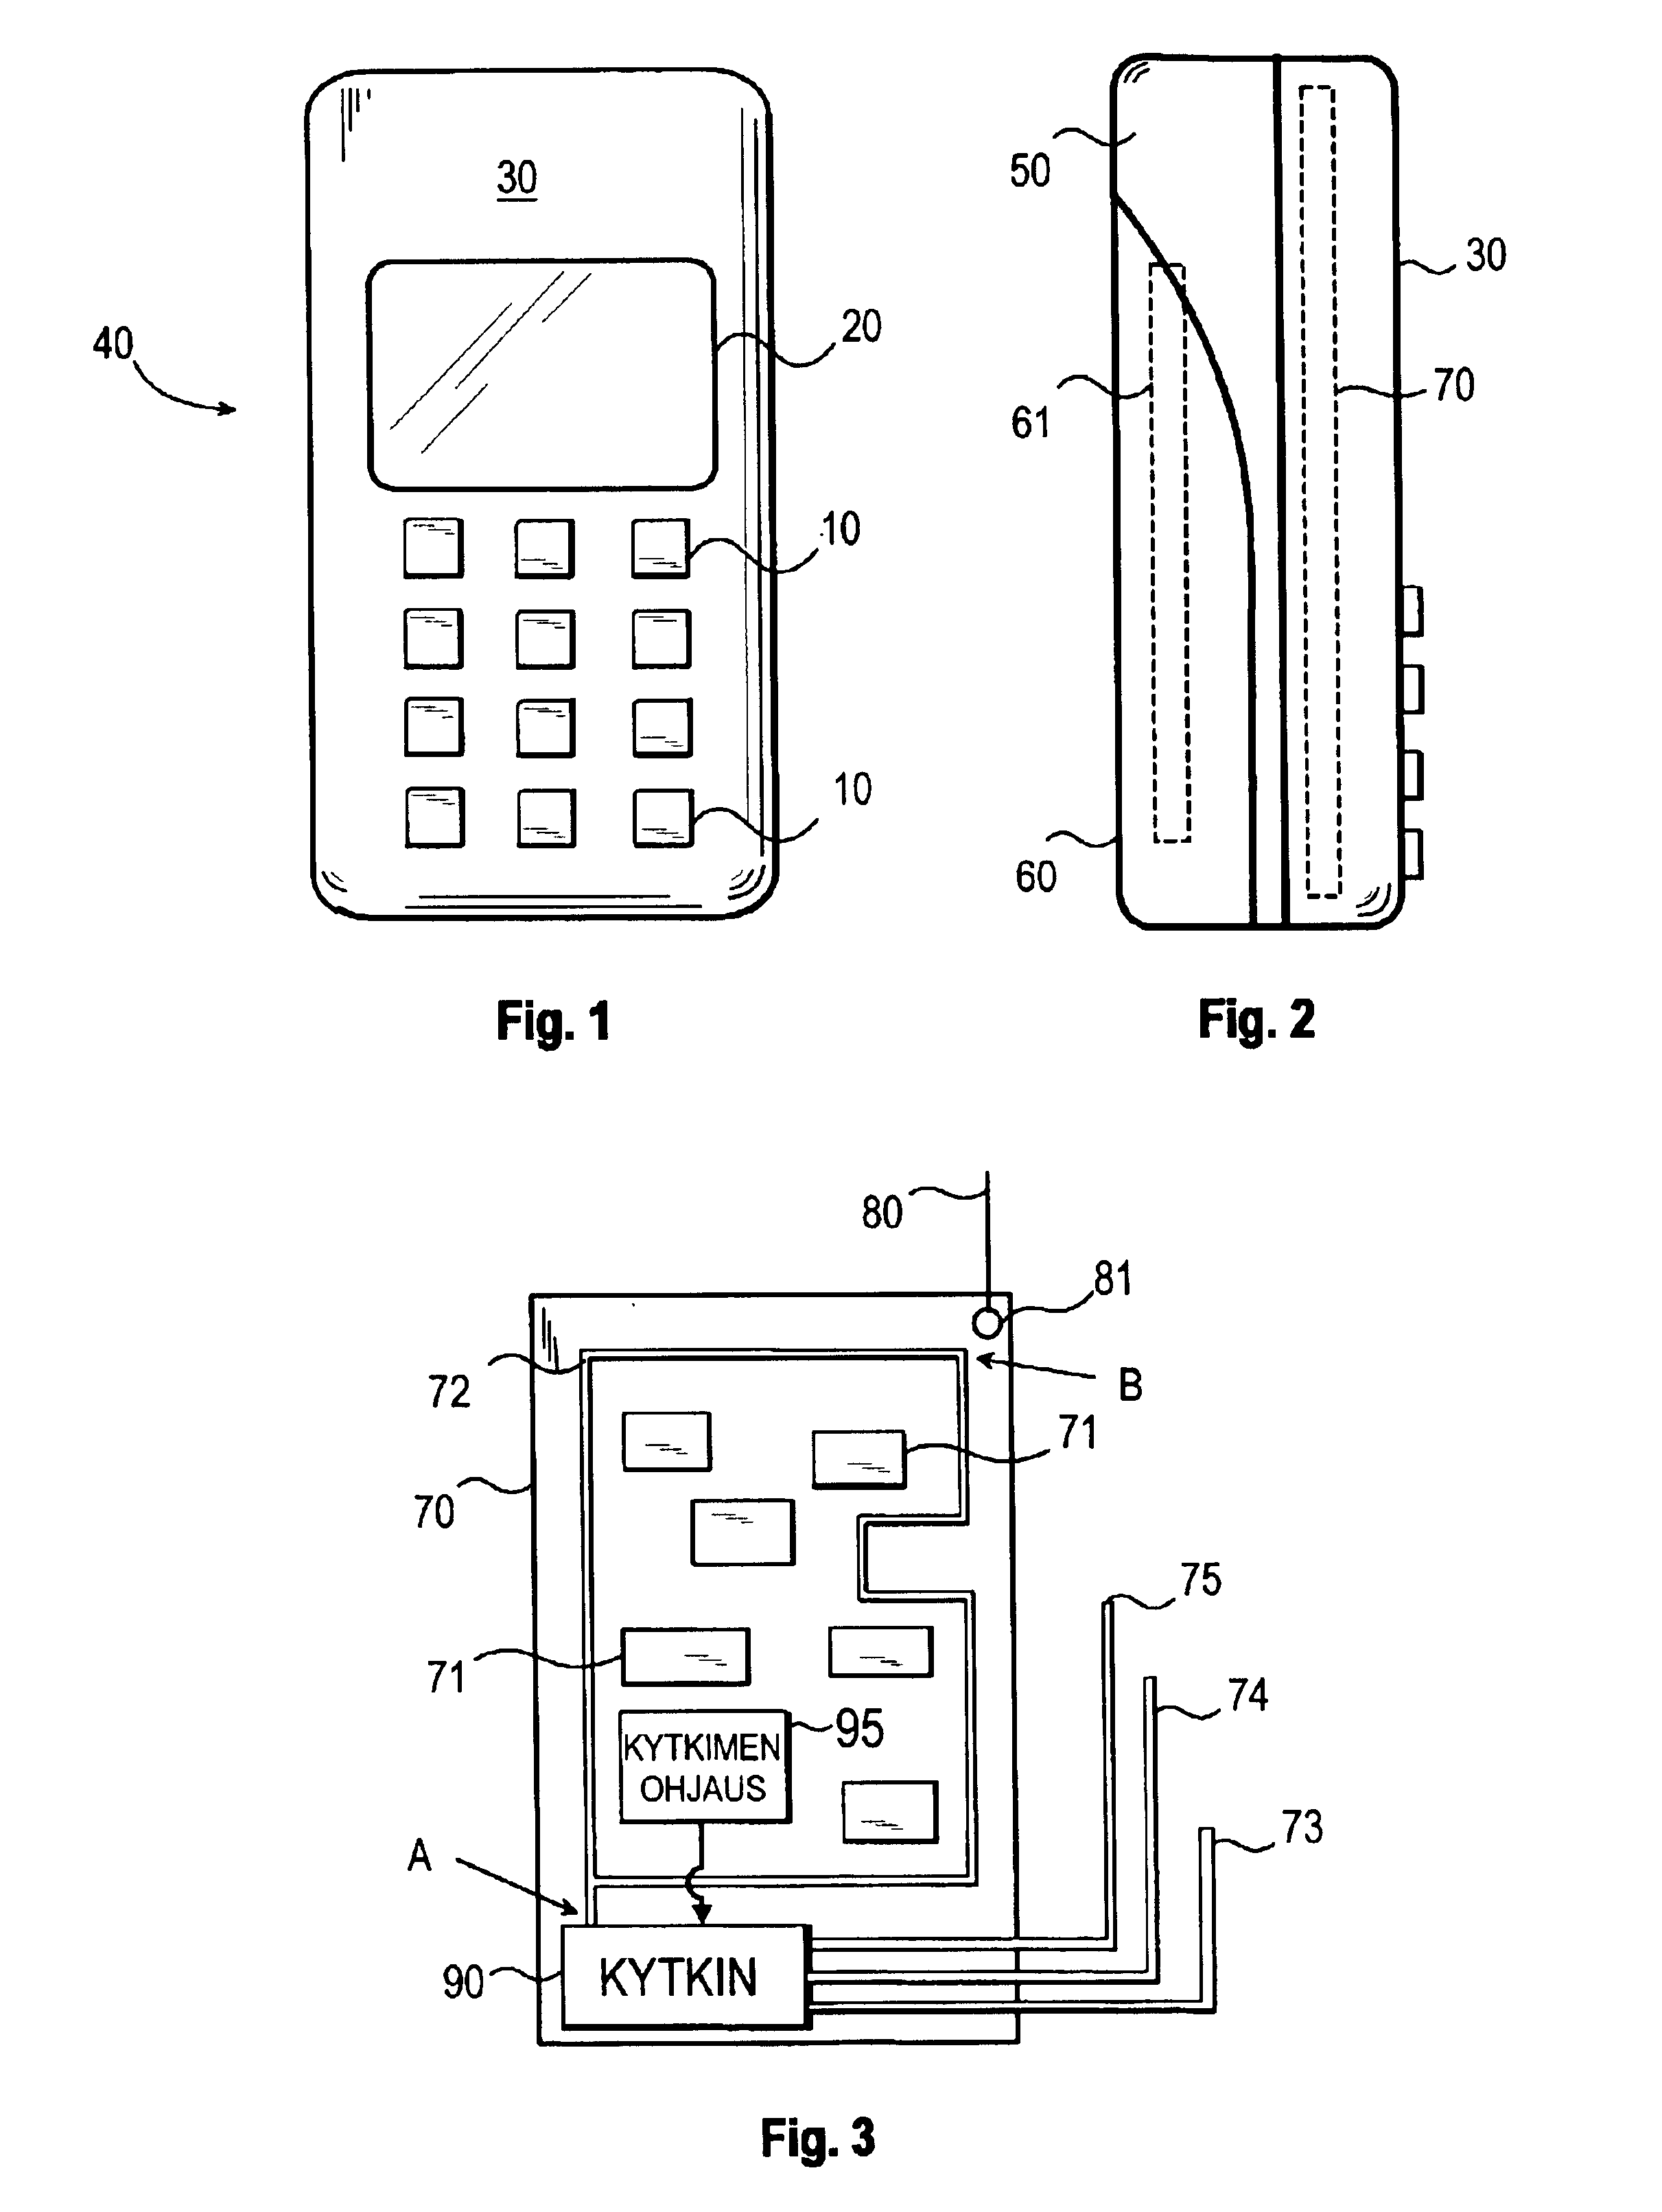 Ground arrangement for a device using wireless data transfer